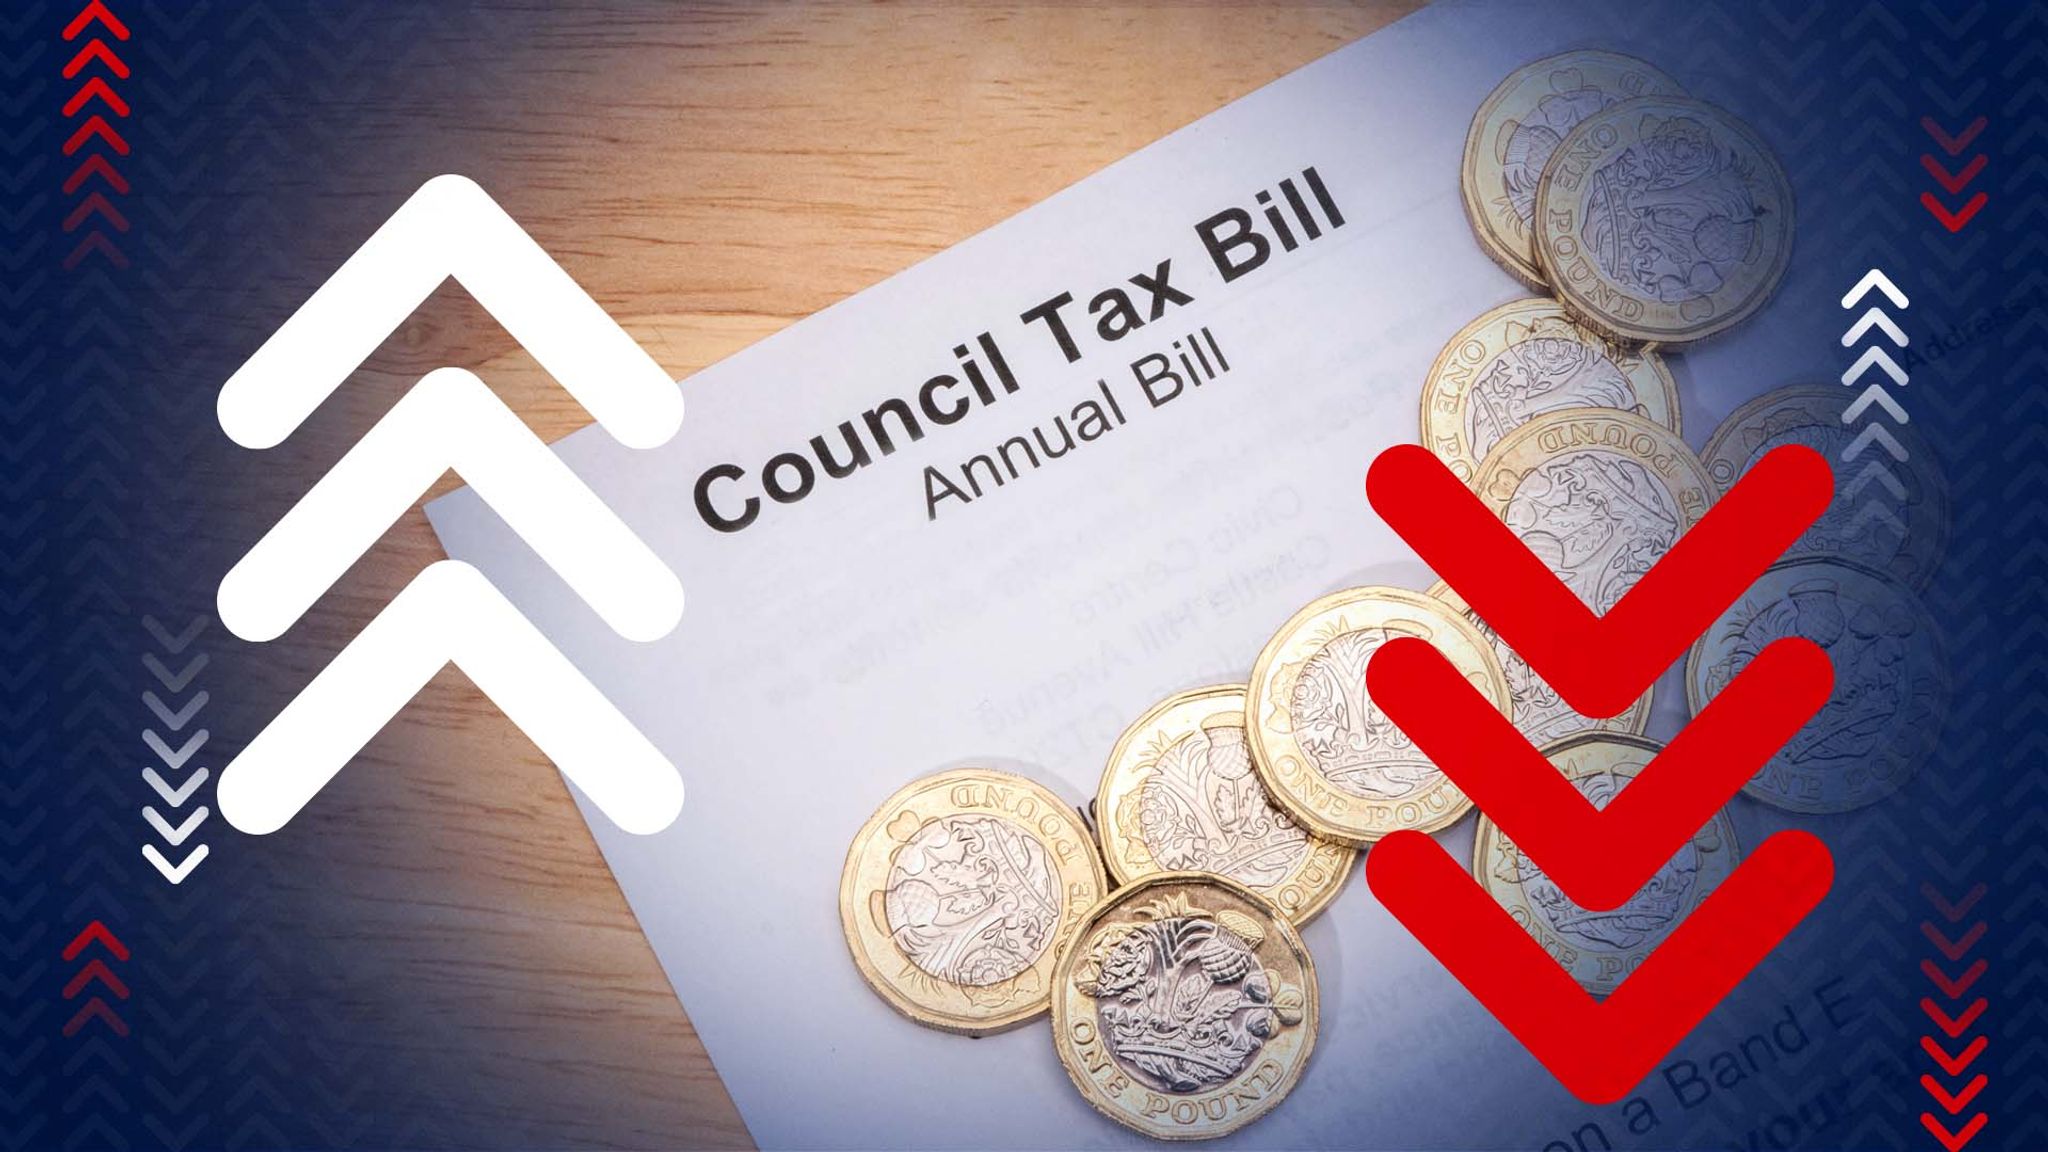 energy-bills-rebate-average-council-tax-bill-will-fall-this-year-after